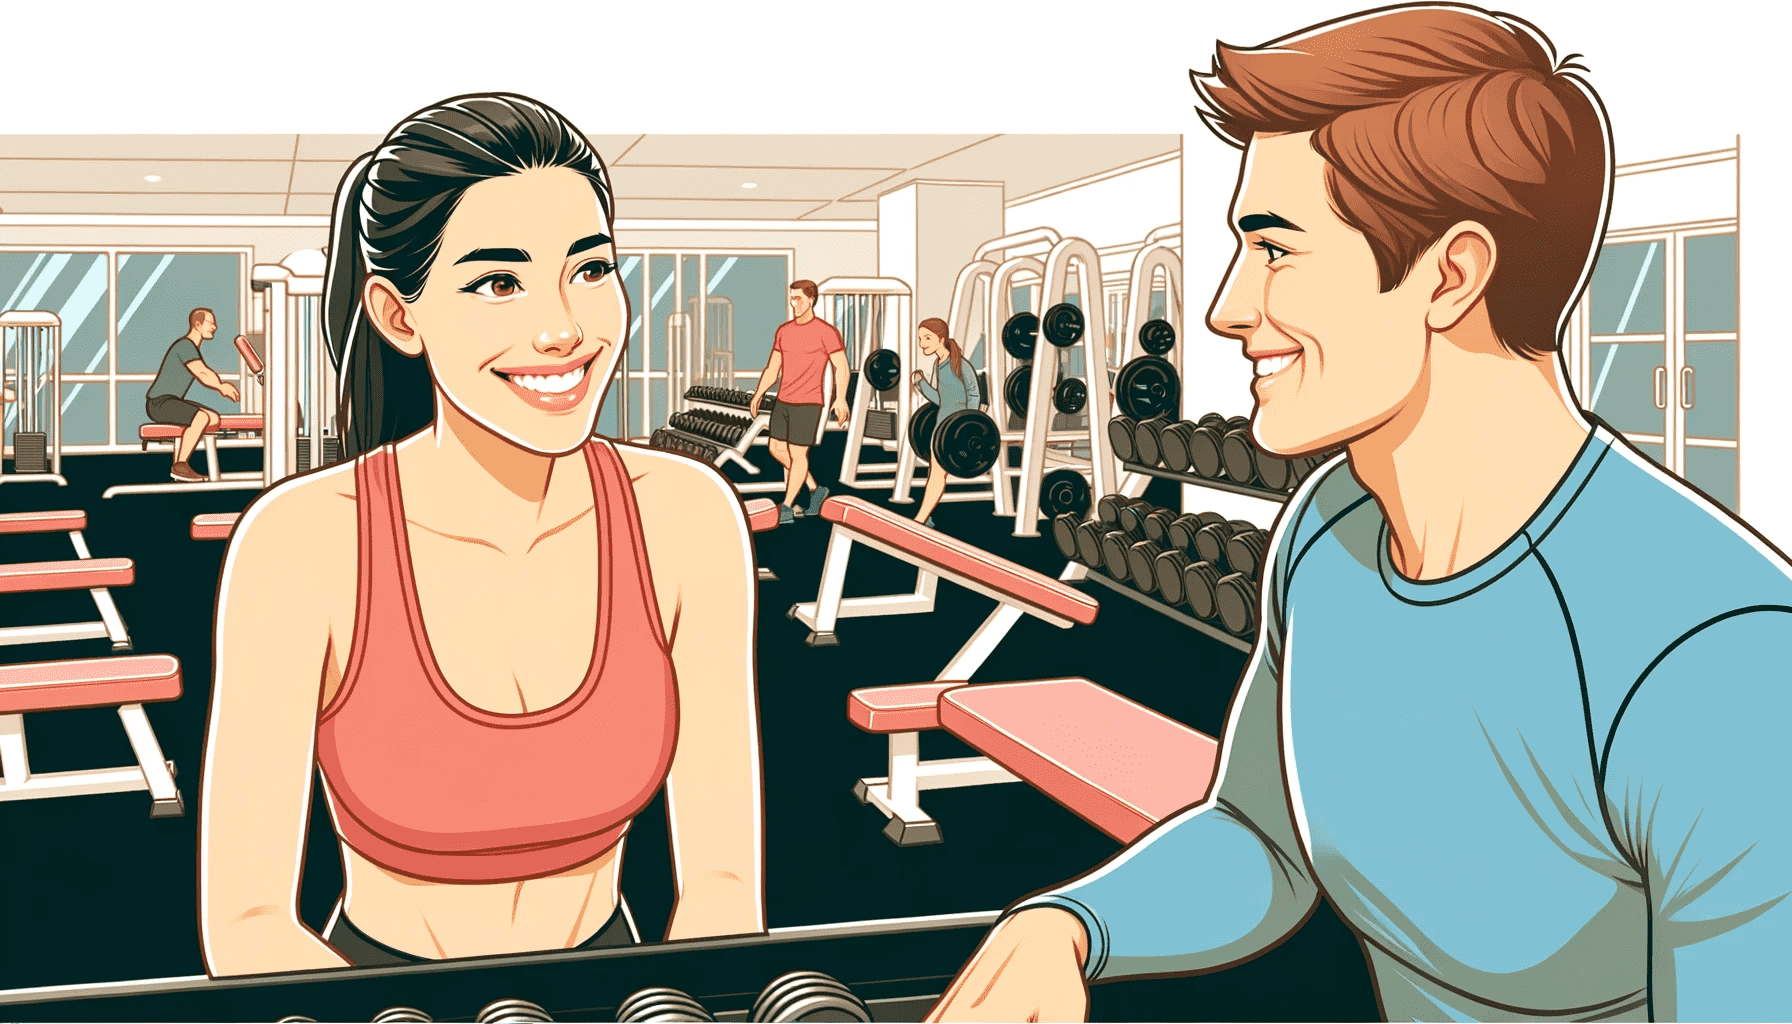 Girl initiating conversation with a guy at the gym